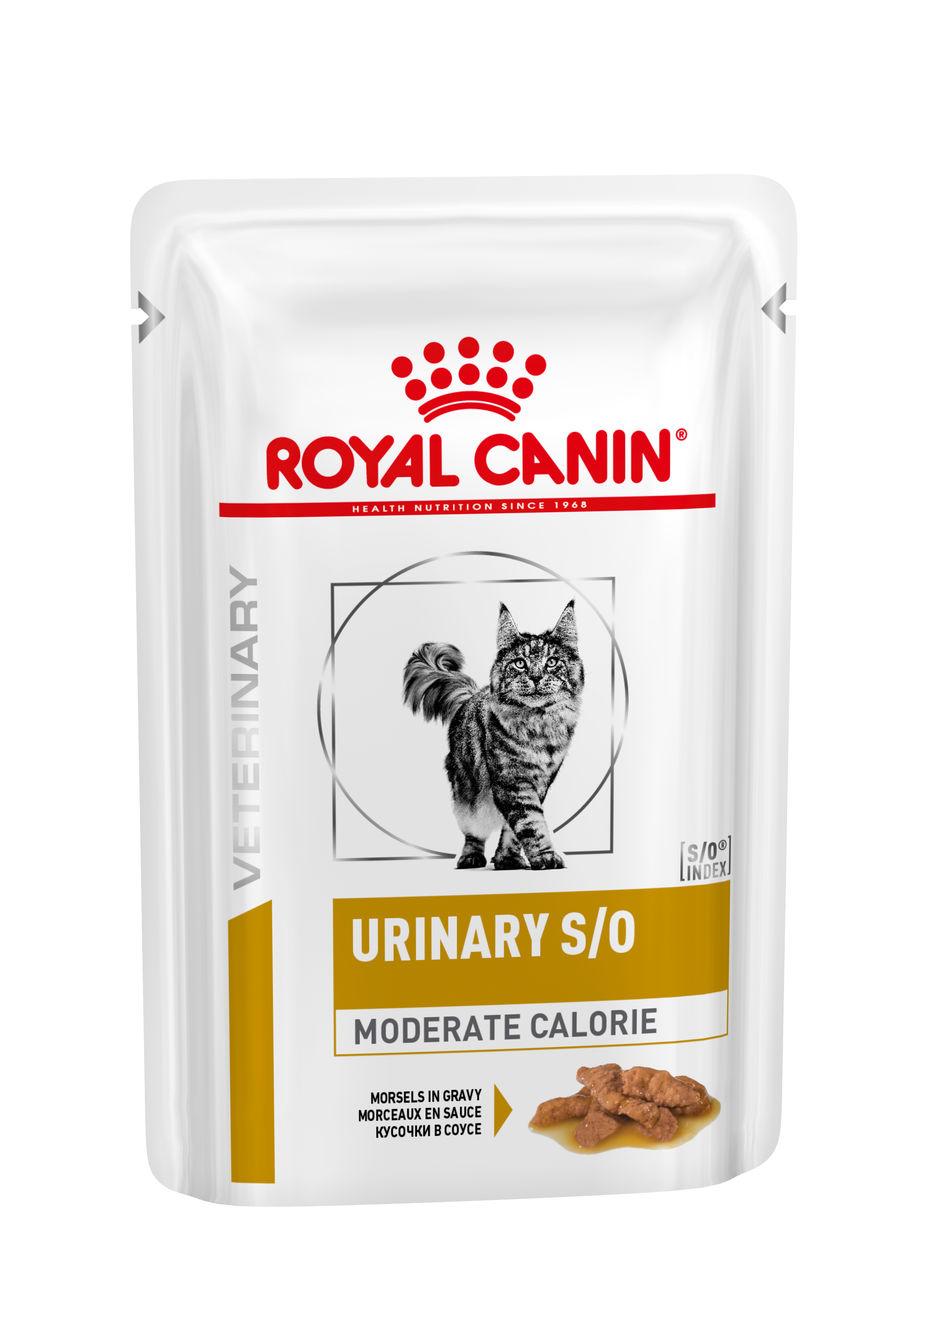 Royal Canin Urinary S/O Moderate Calorie Kat  - pouches 12x85g